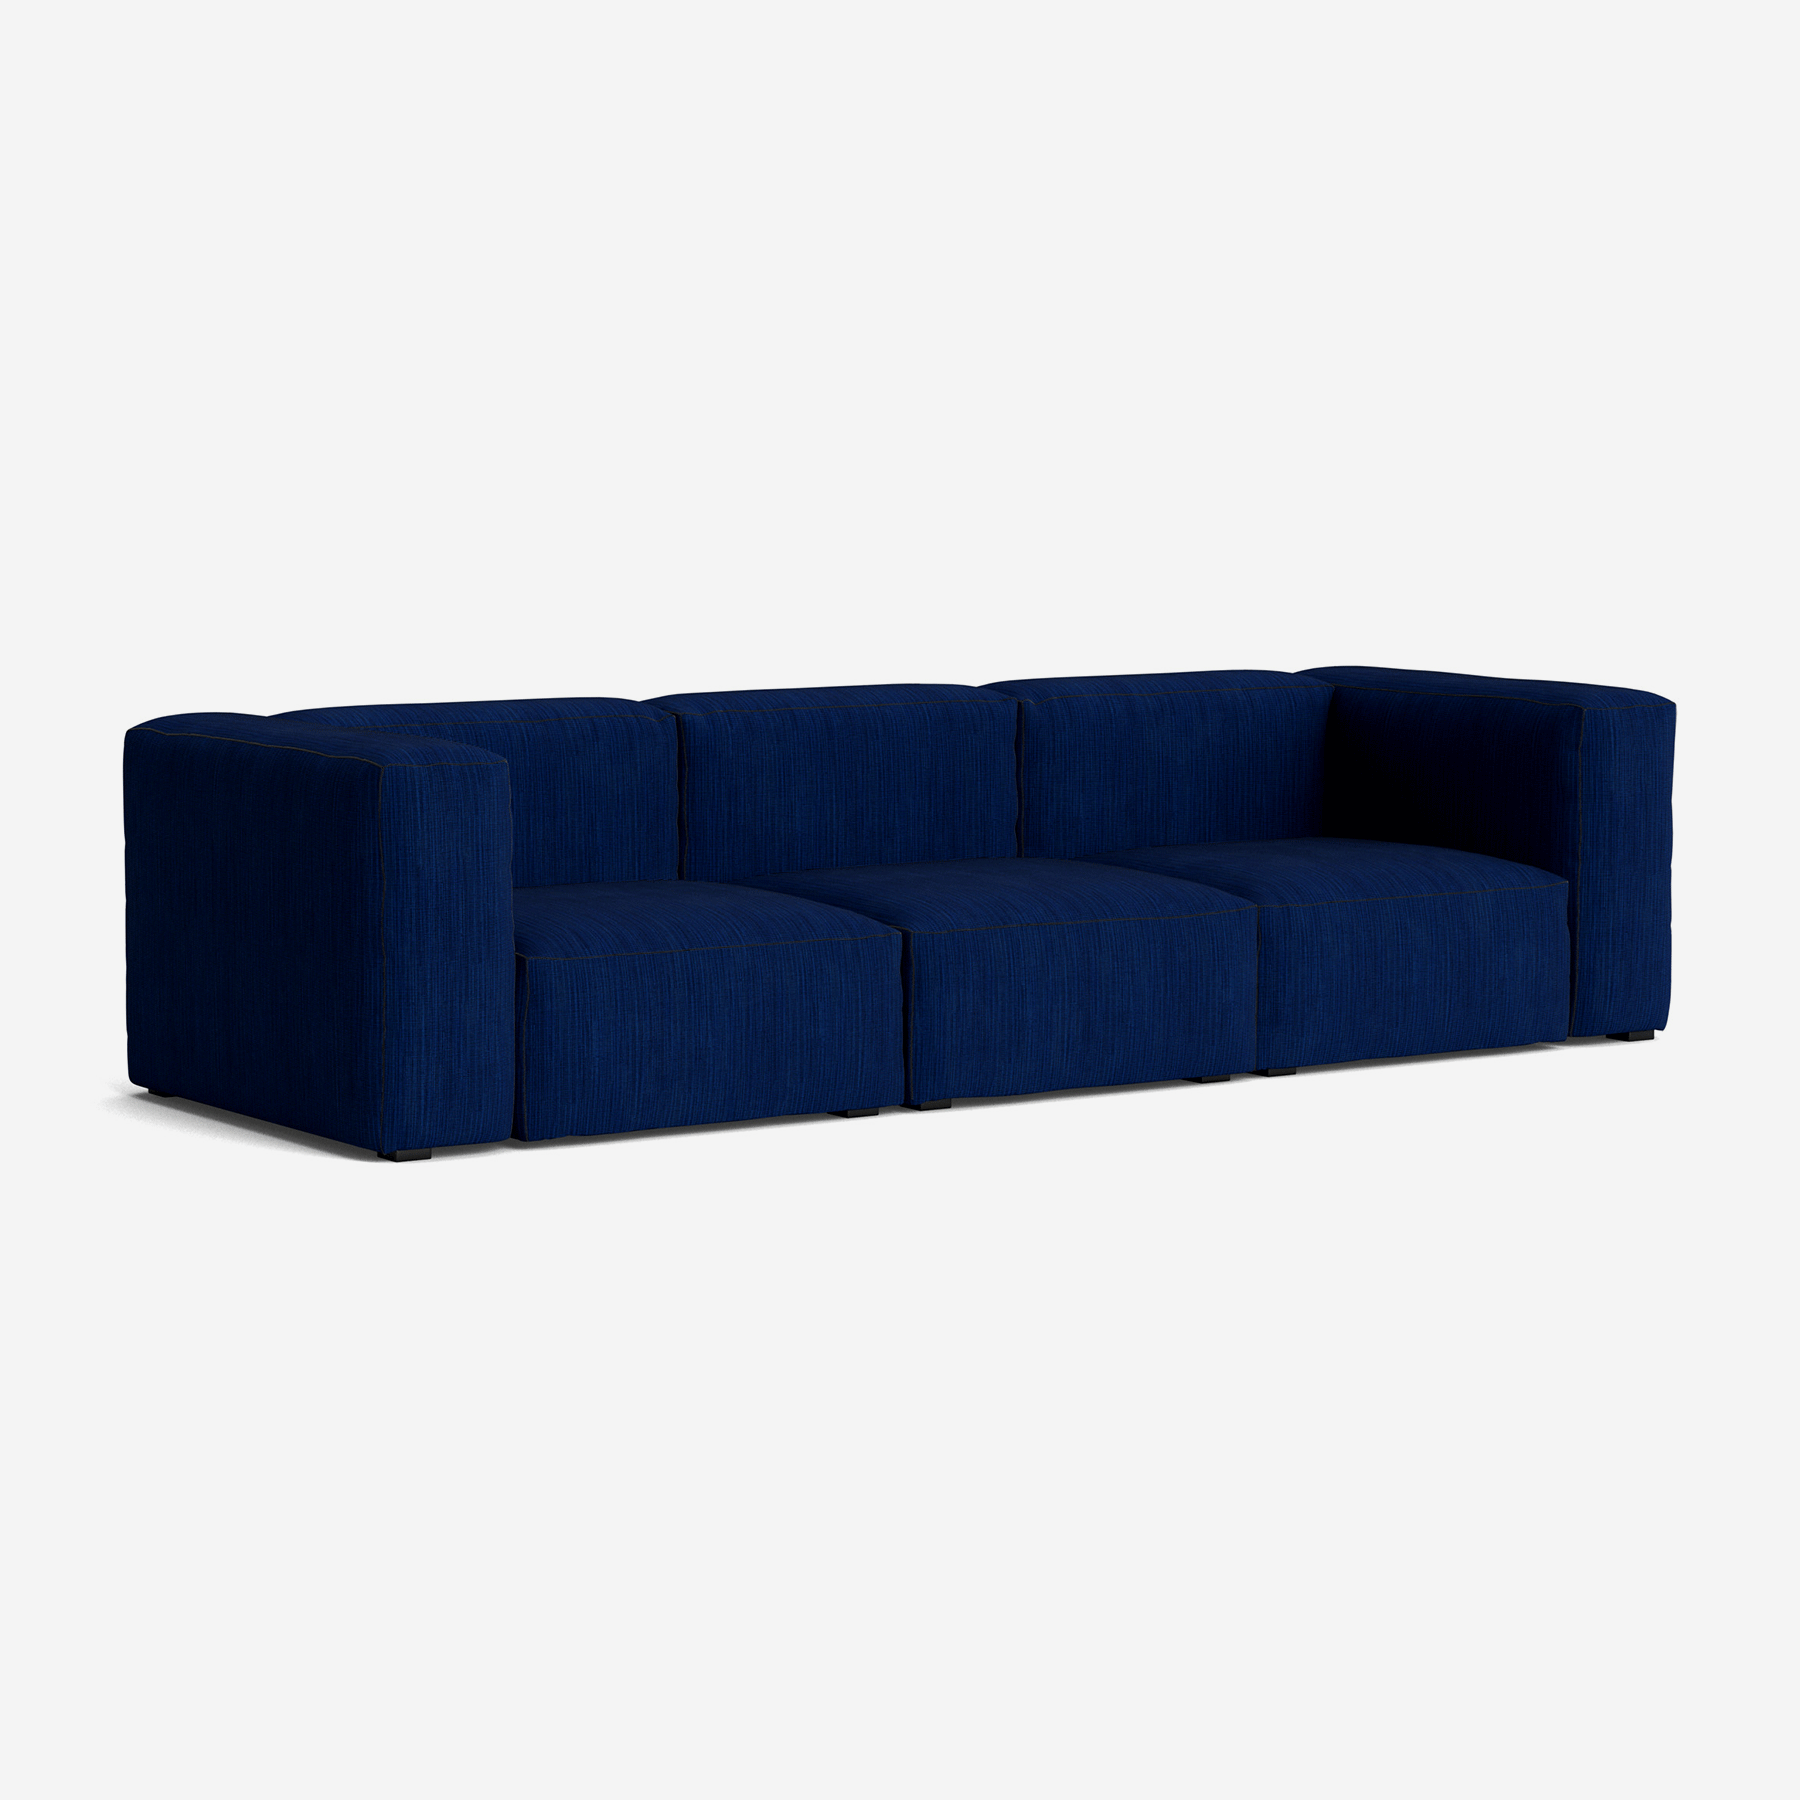 Mags 3 Seater Sofa, Combination 1